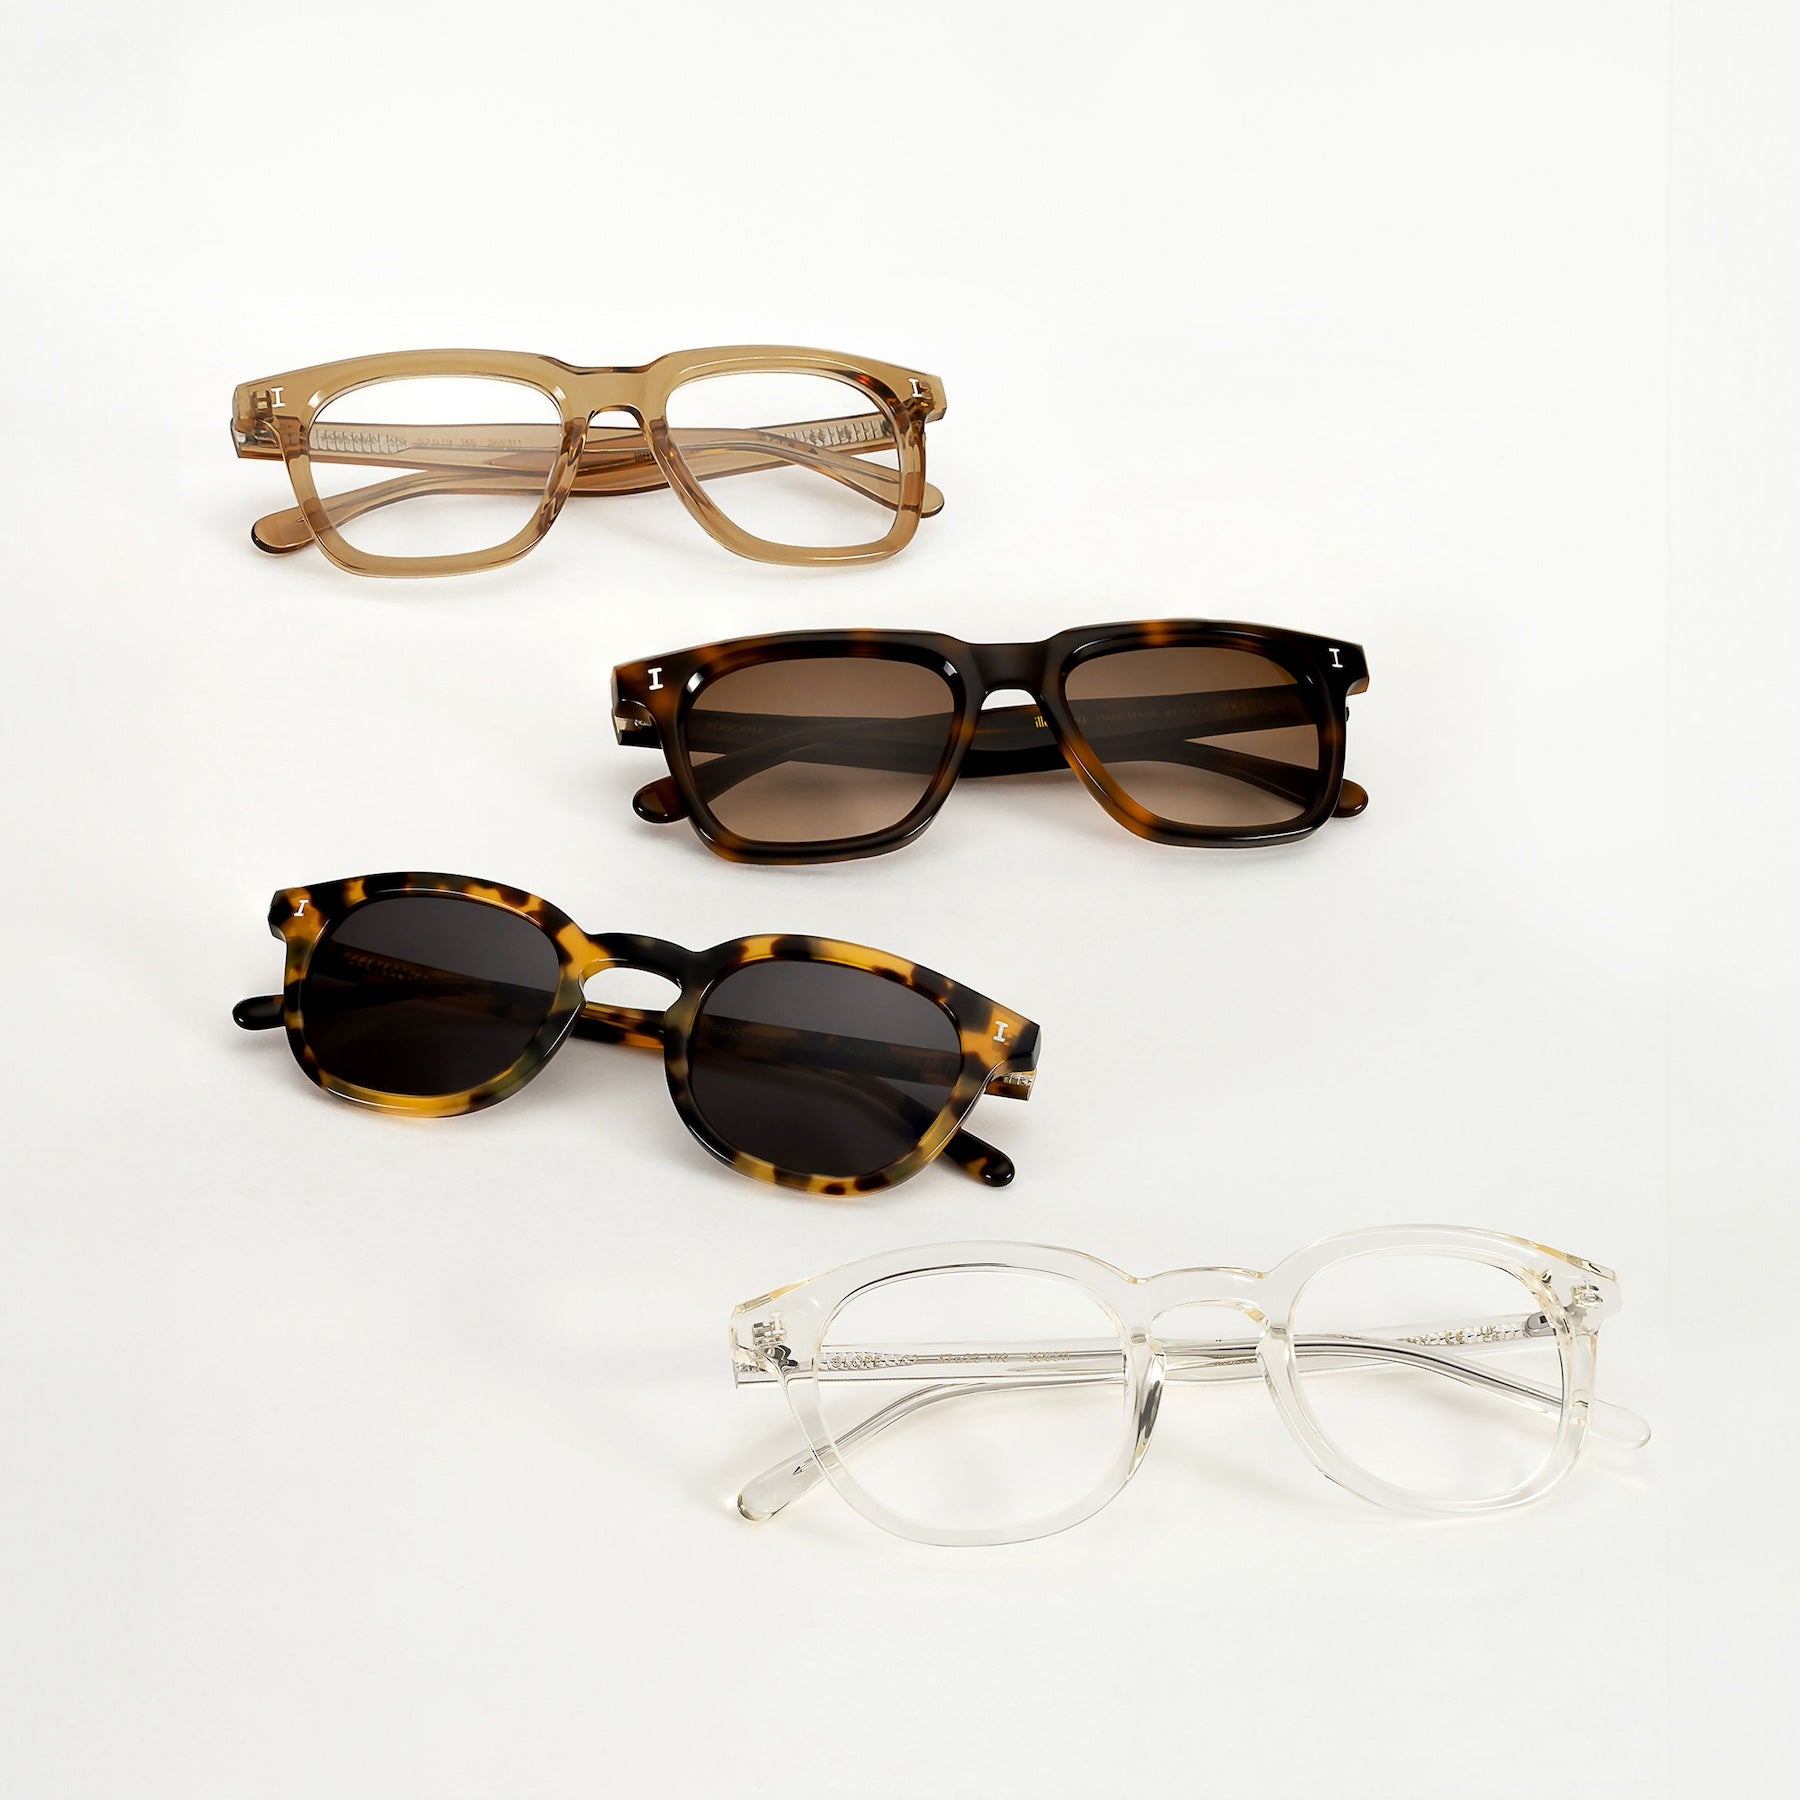 Toscana Optical in Brown, Toscana Sunglasses in Havana, Slope Sunglasses in Tortoise, and Slope Optical in Champagne featured on a white background